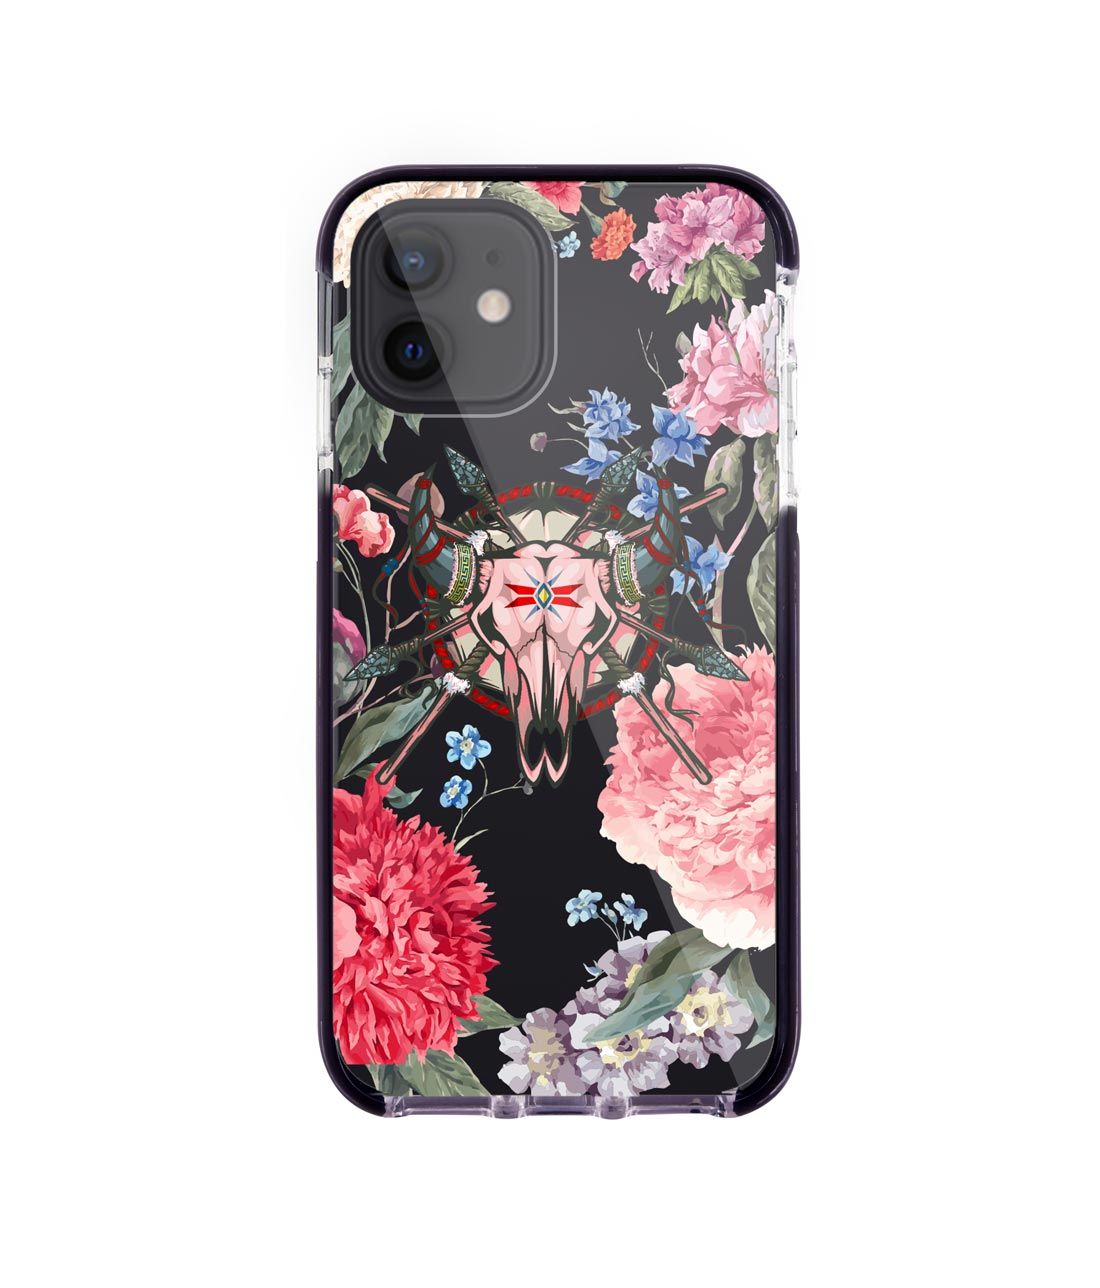 Floral Symmetry - Extreme Case for iPhone 12